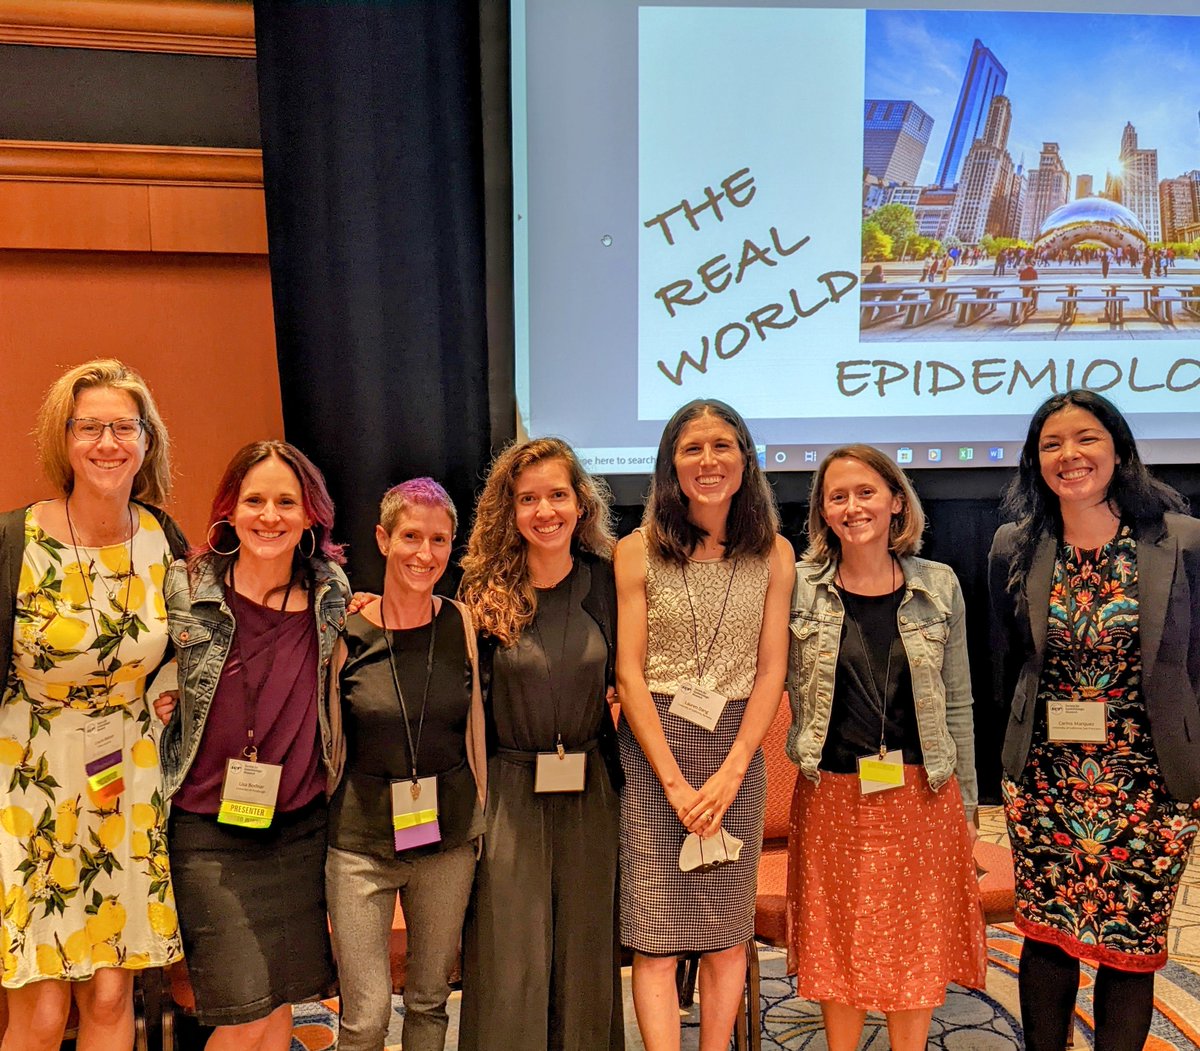 This is the true story of 7 epidemiologists... Picked to give presentation... To find out what happens... When people stop making assumptions... And start getting REAL. This is the real world - Epidemiology! #SER2022 #epitwitter 1/3